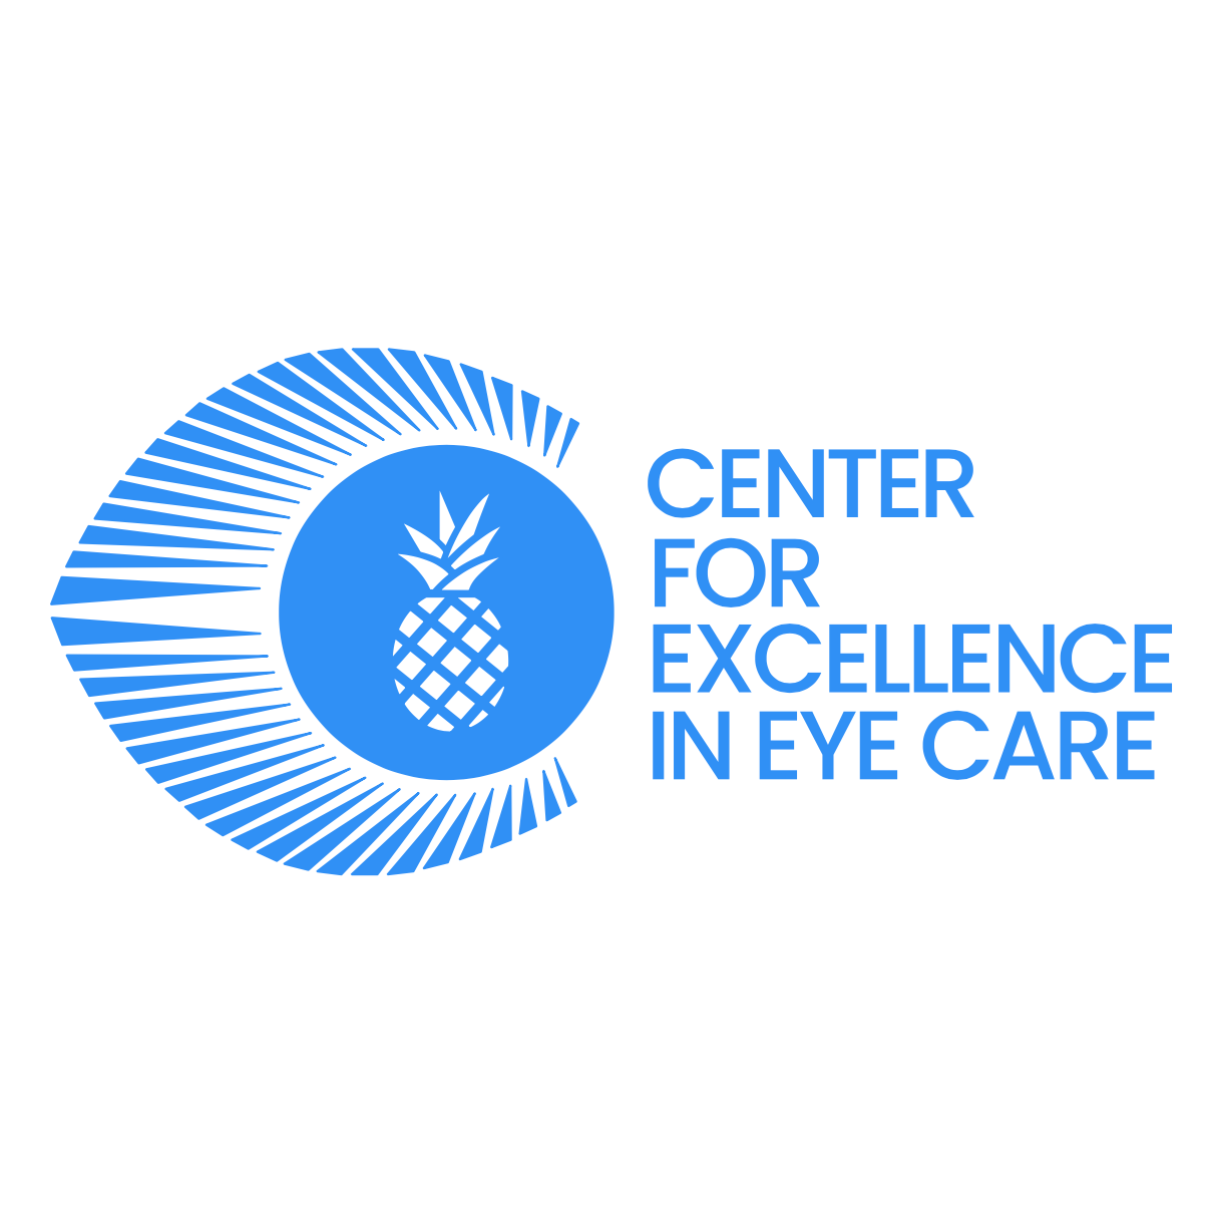 Center For Excellence In Eye Care - Miami, FL 33176 - (305)598-2020 | ShowMeLocal.com